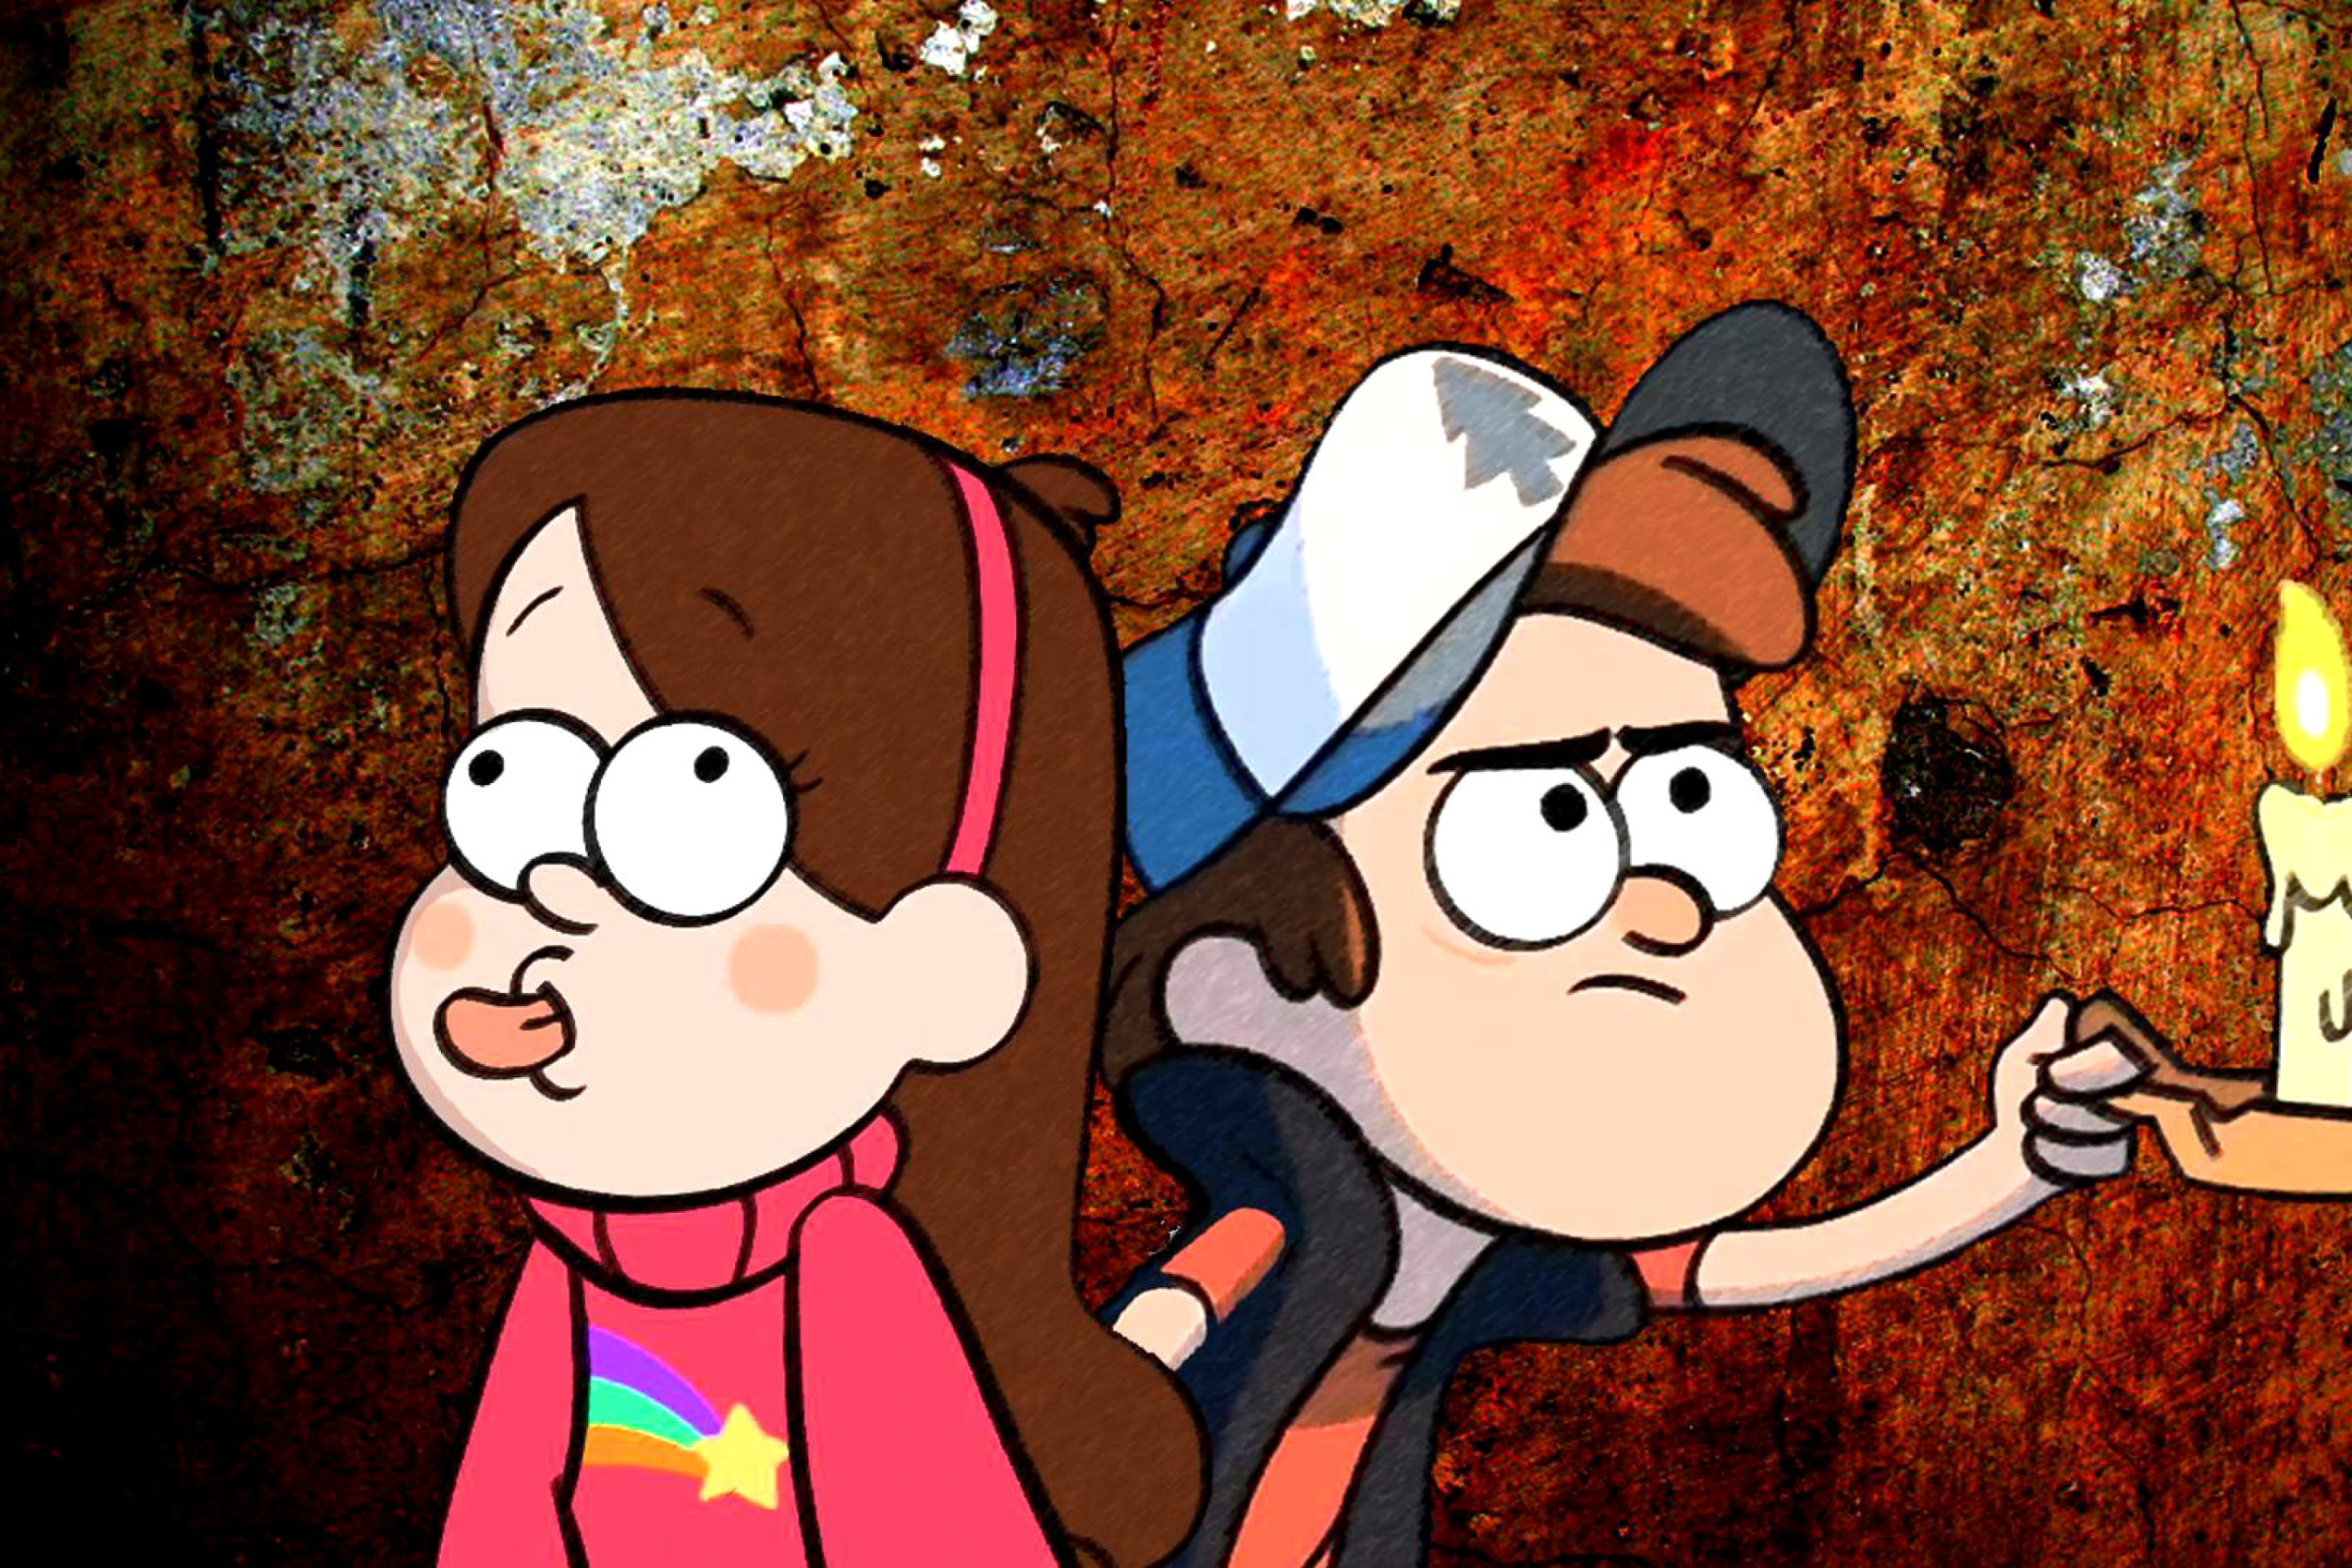 Mabel and Dipper in Gravity Falls Wallpaper for Android 2880x1920